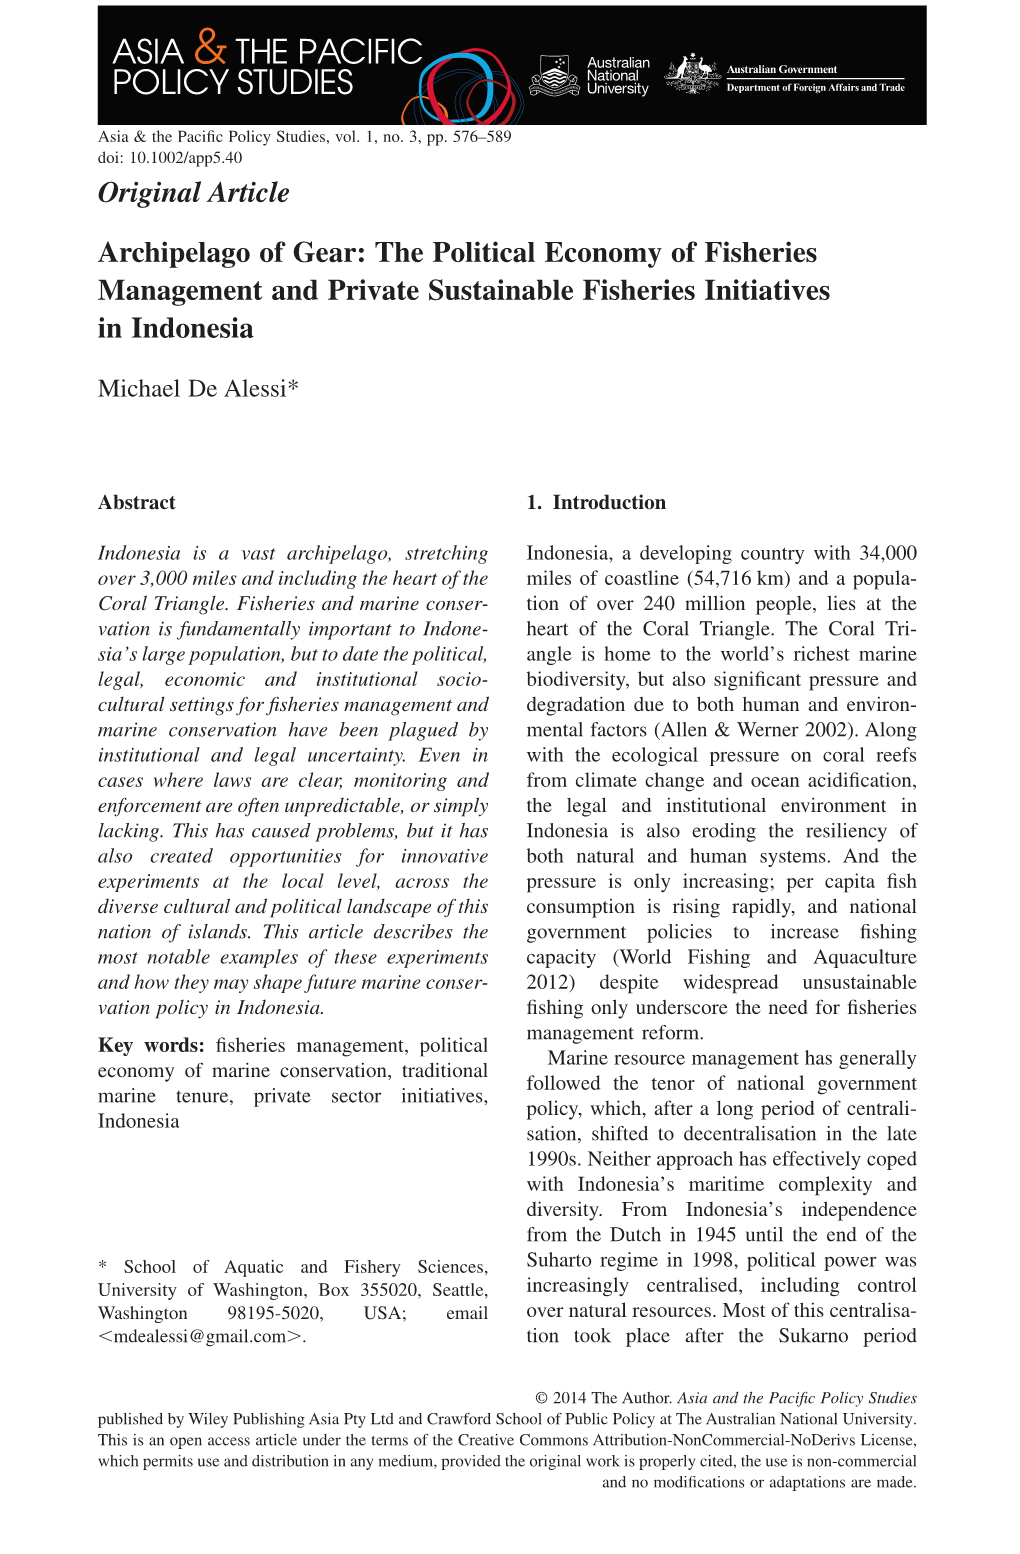 The Political Economy of Fisheries Management and Private Sustainable Fisheries Initiatives in Indonesia